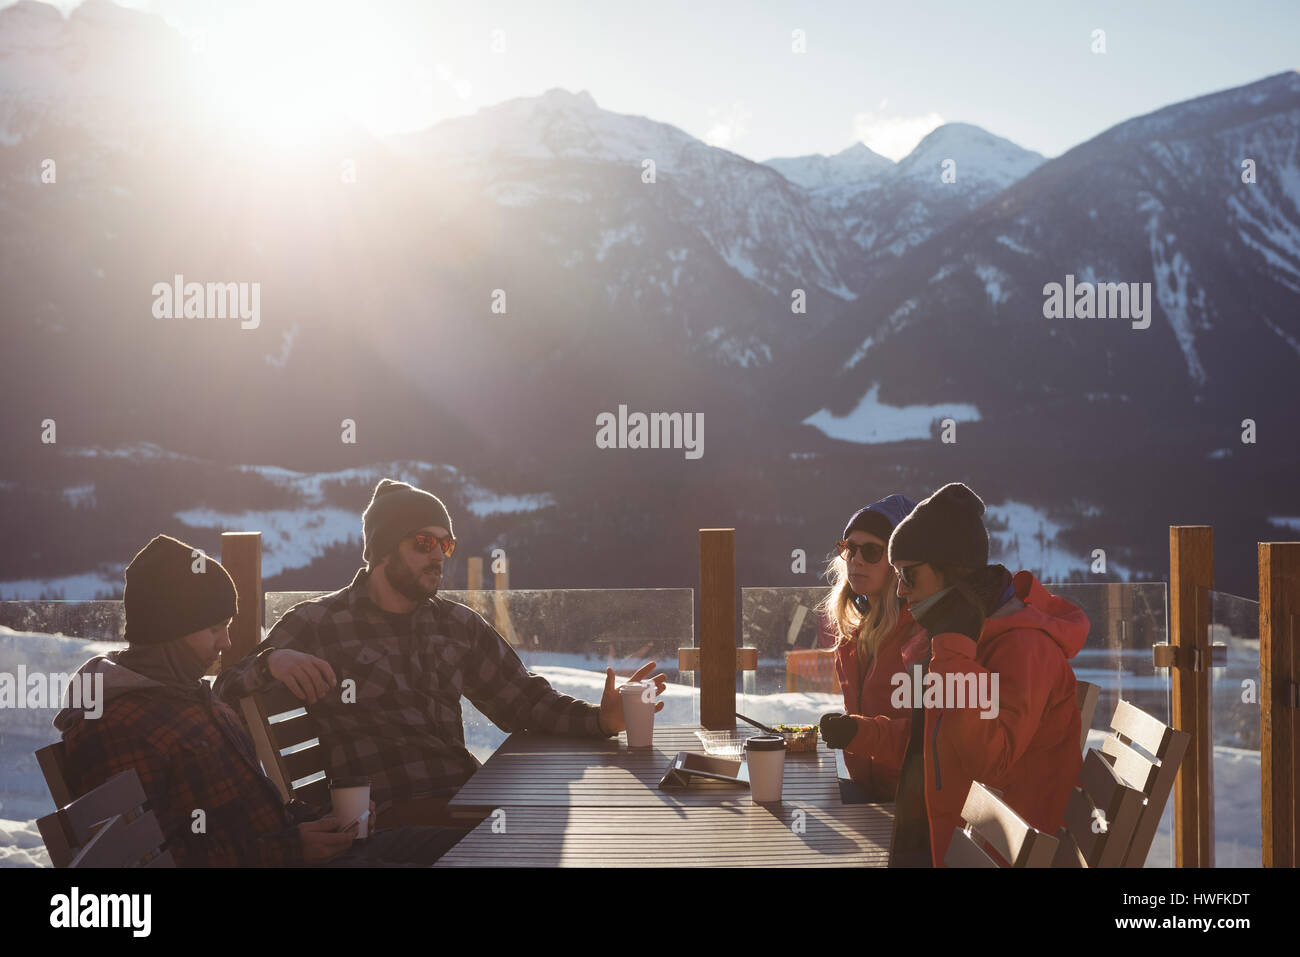 Skiers interacting with each other while having cup of coffee in ski resort Stock Photo